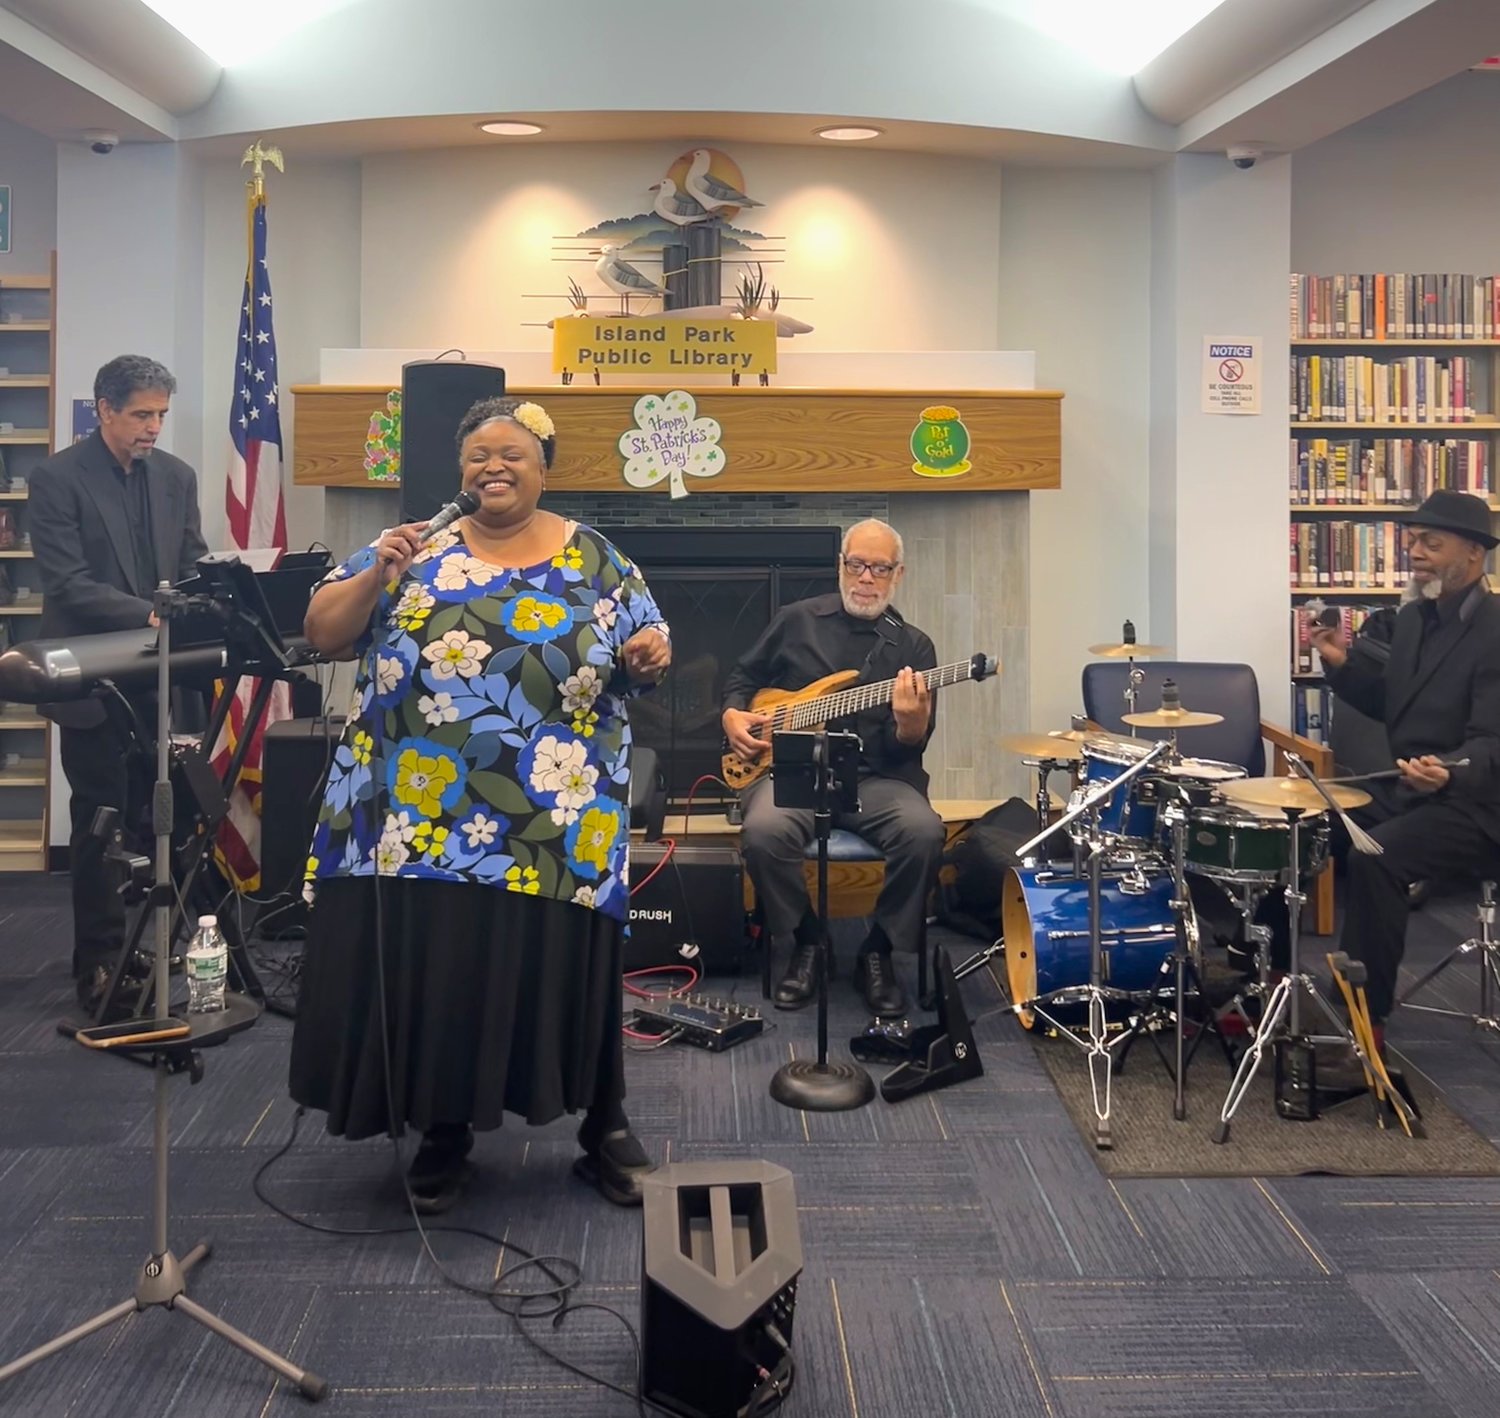 Rhonda Denét and the Silver Fox Trio — Chuck Batton on drums, Gene Torres on bass and Michael Bardash on keys performing at the Island Park Public Library on March 11. Their song selection honored the women    singers who came before them.